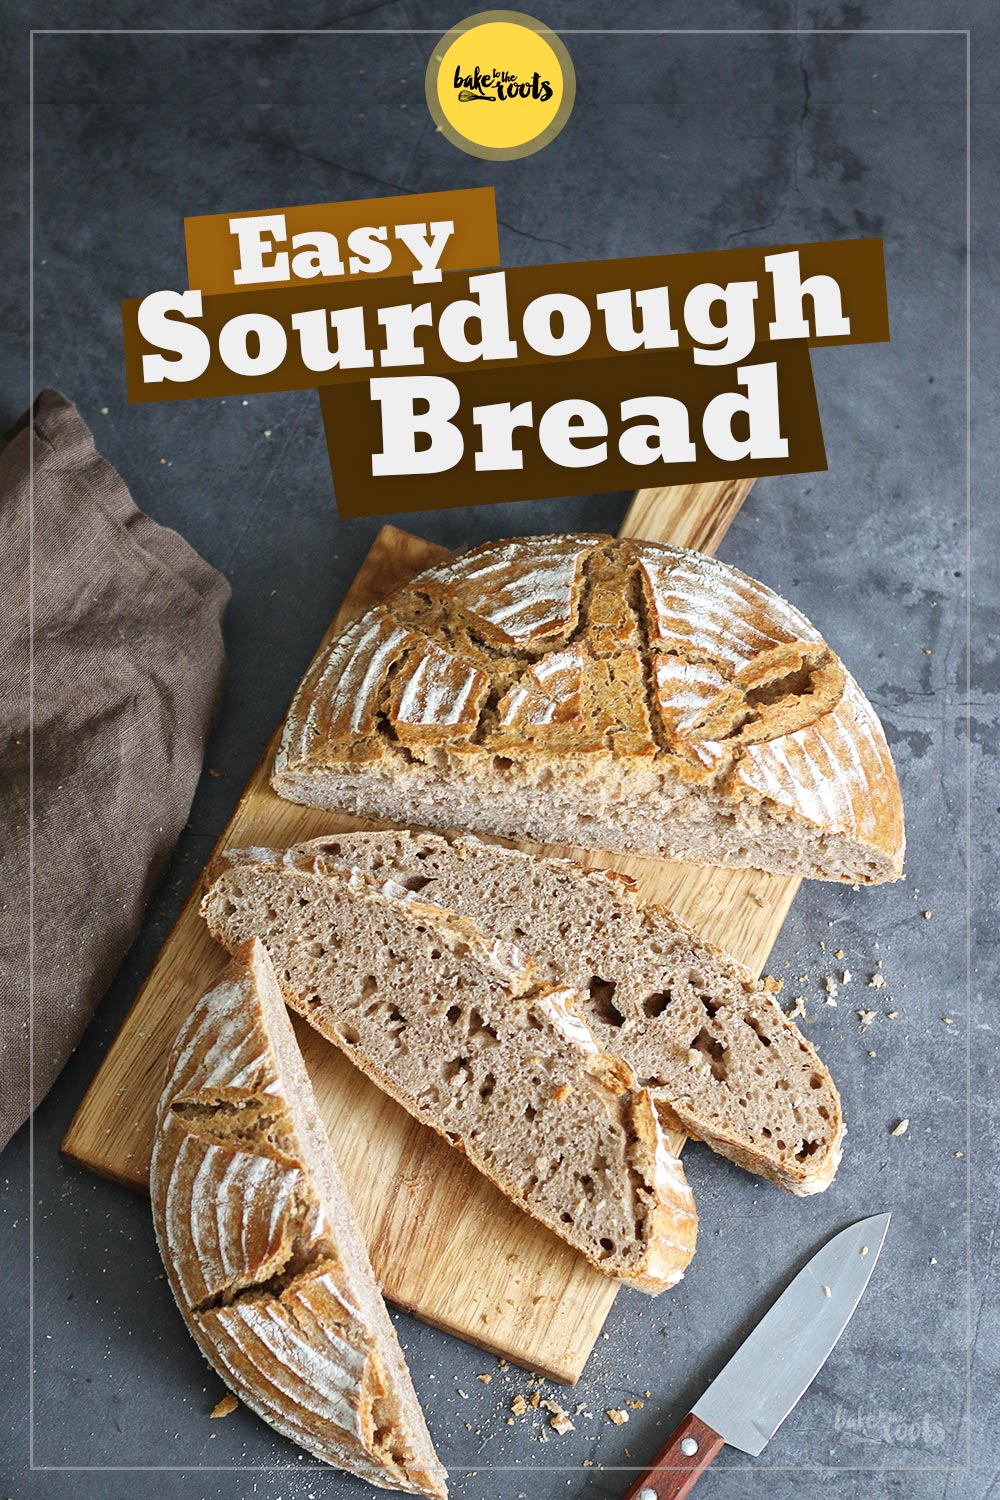 Easy Sourdough Bread | Bake to the roots